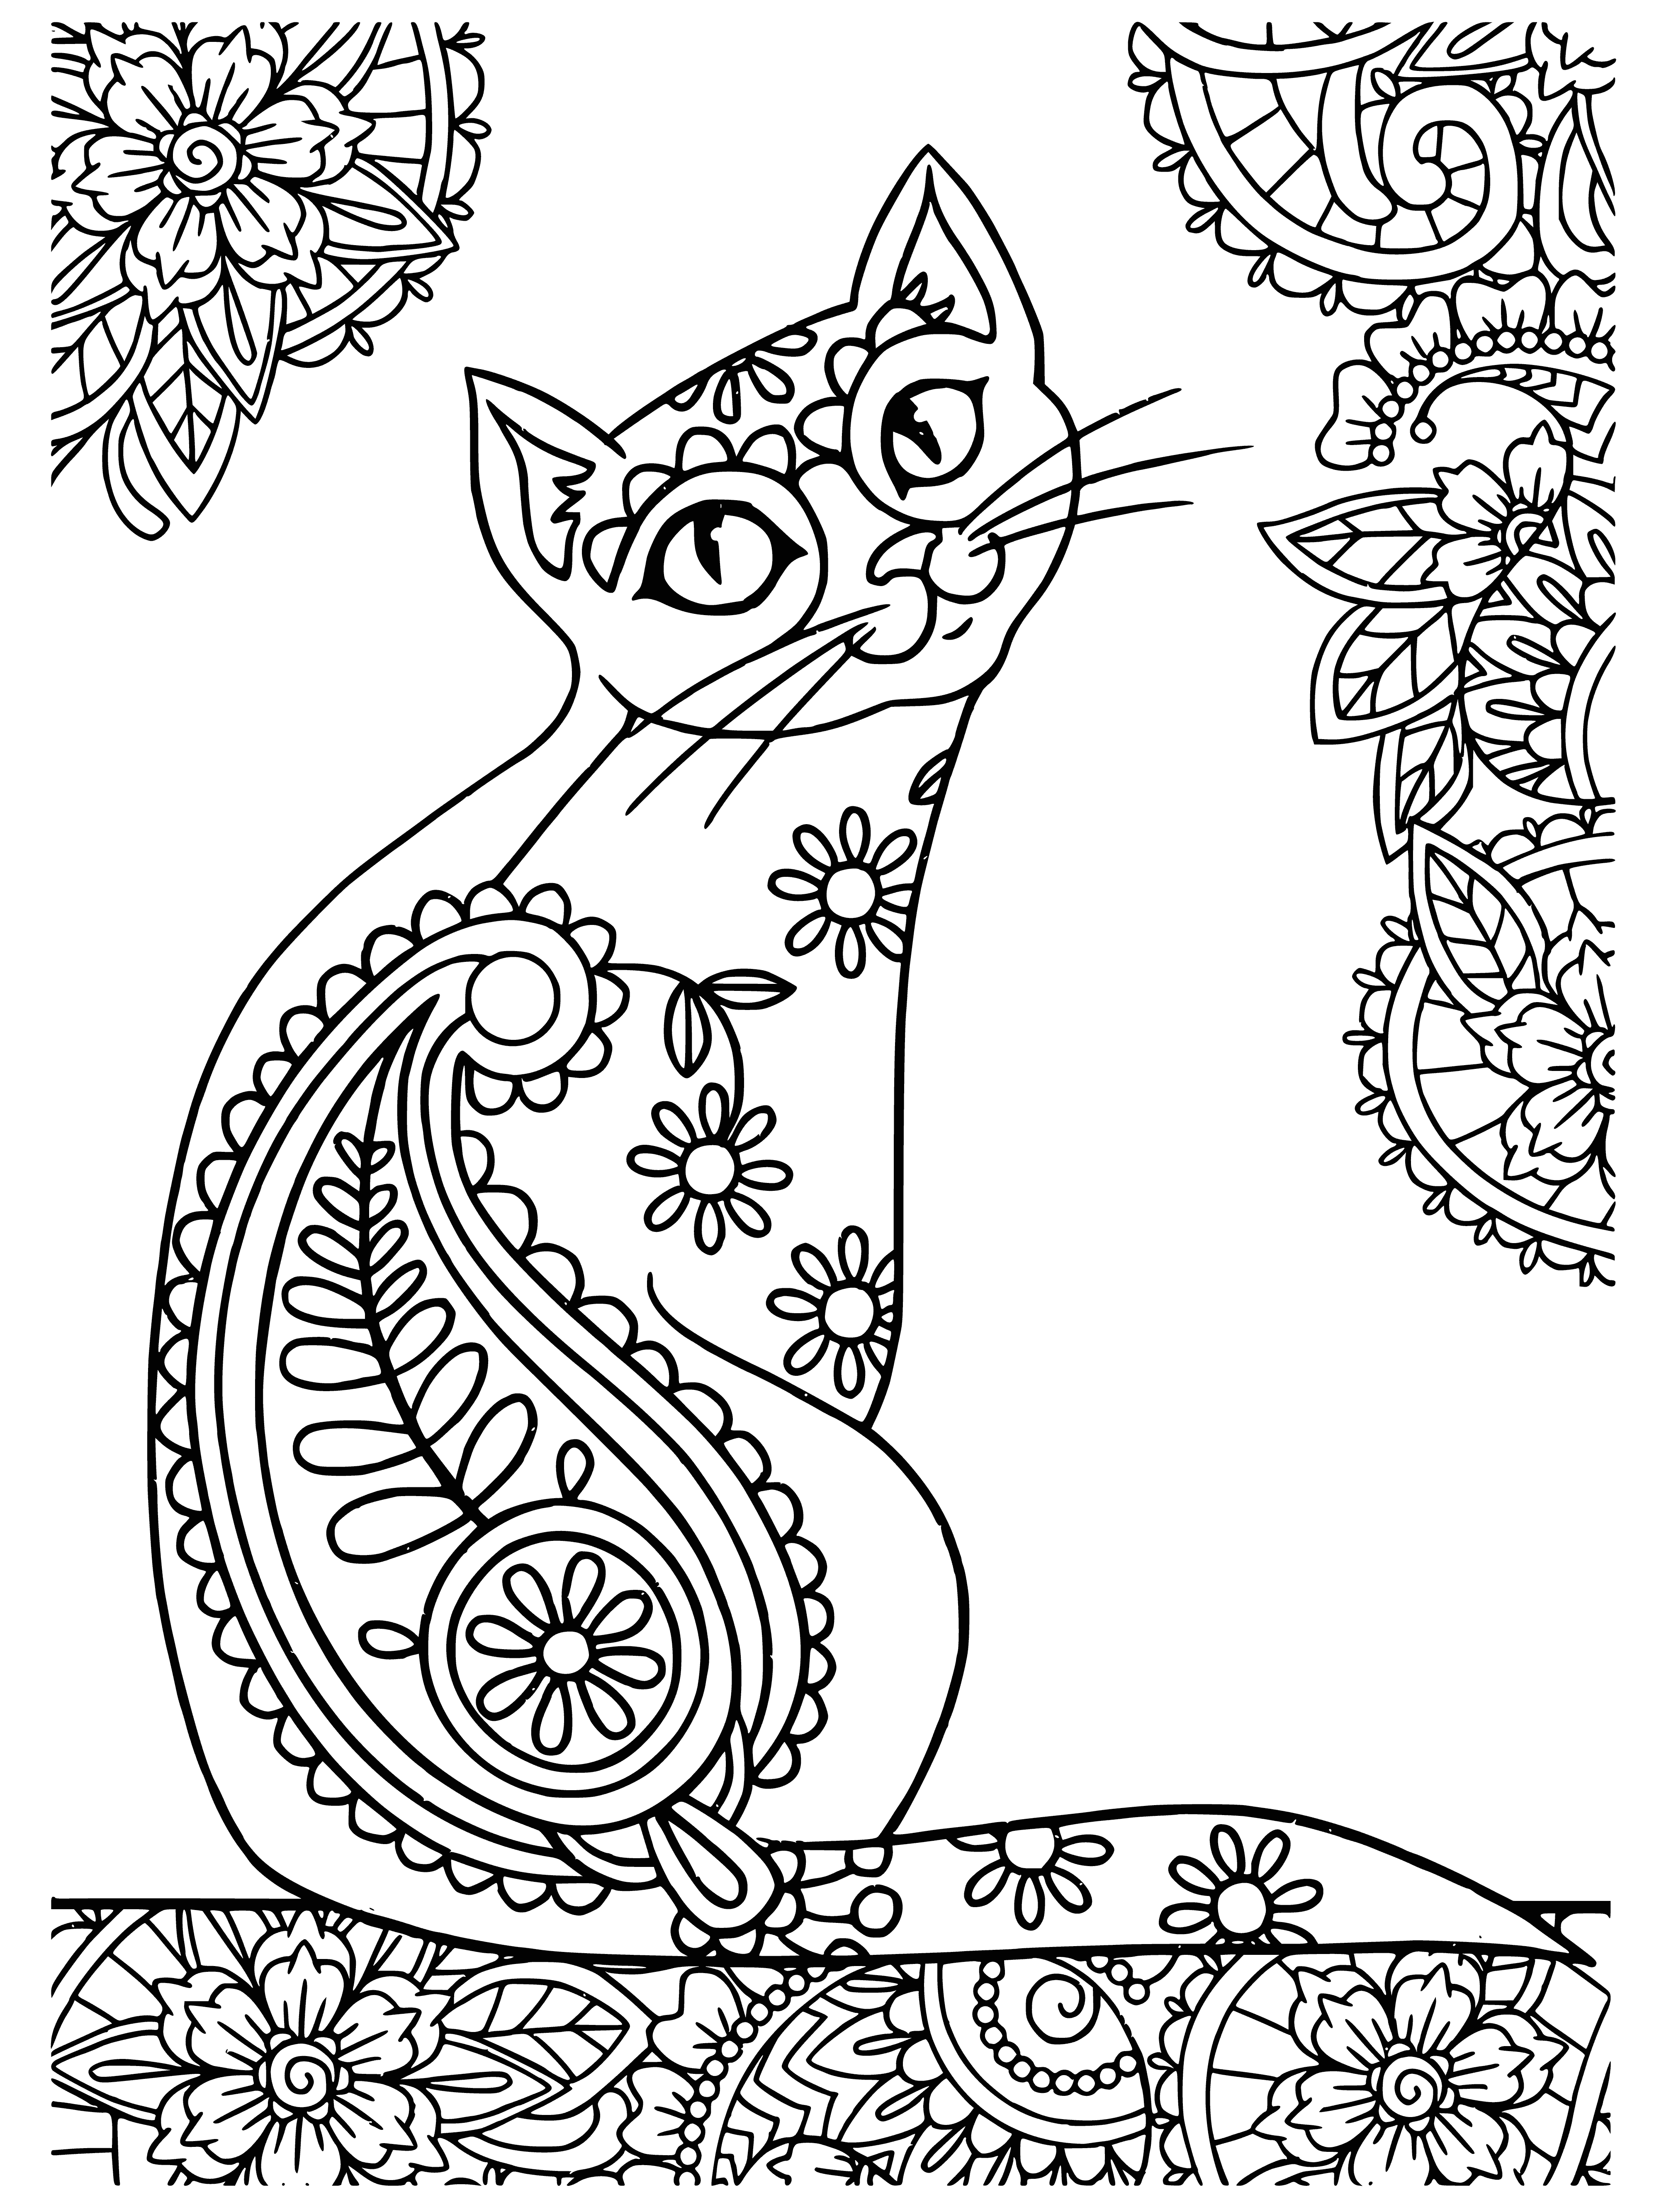 coloring page: Color a cute cat surrounded by balls of color in the Antistress Cats coloring page! Enjoy a calming and creative activity to reduce stress.